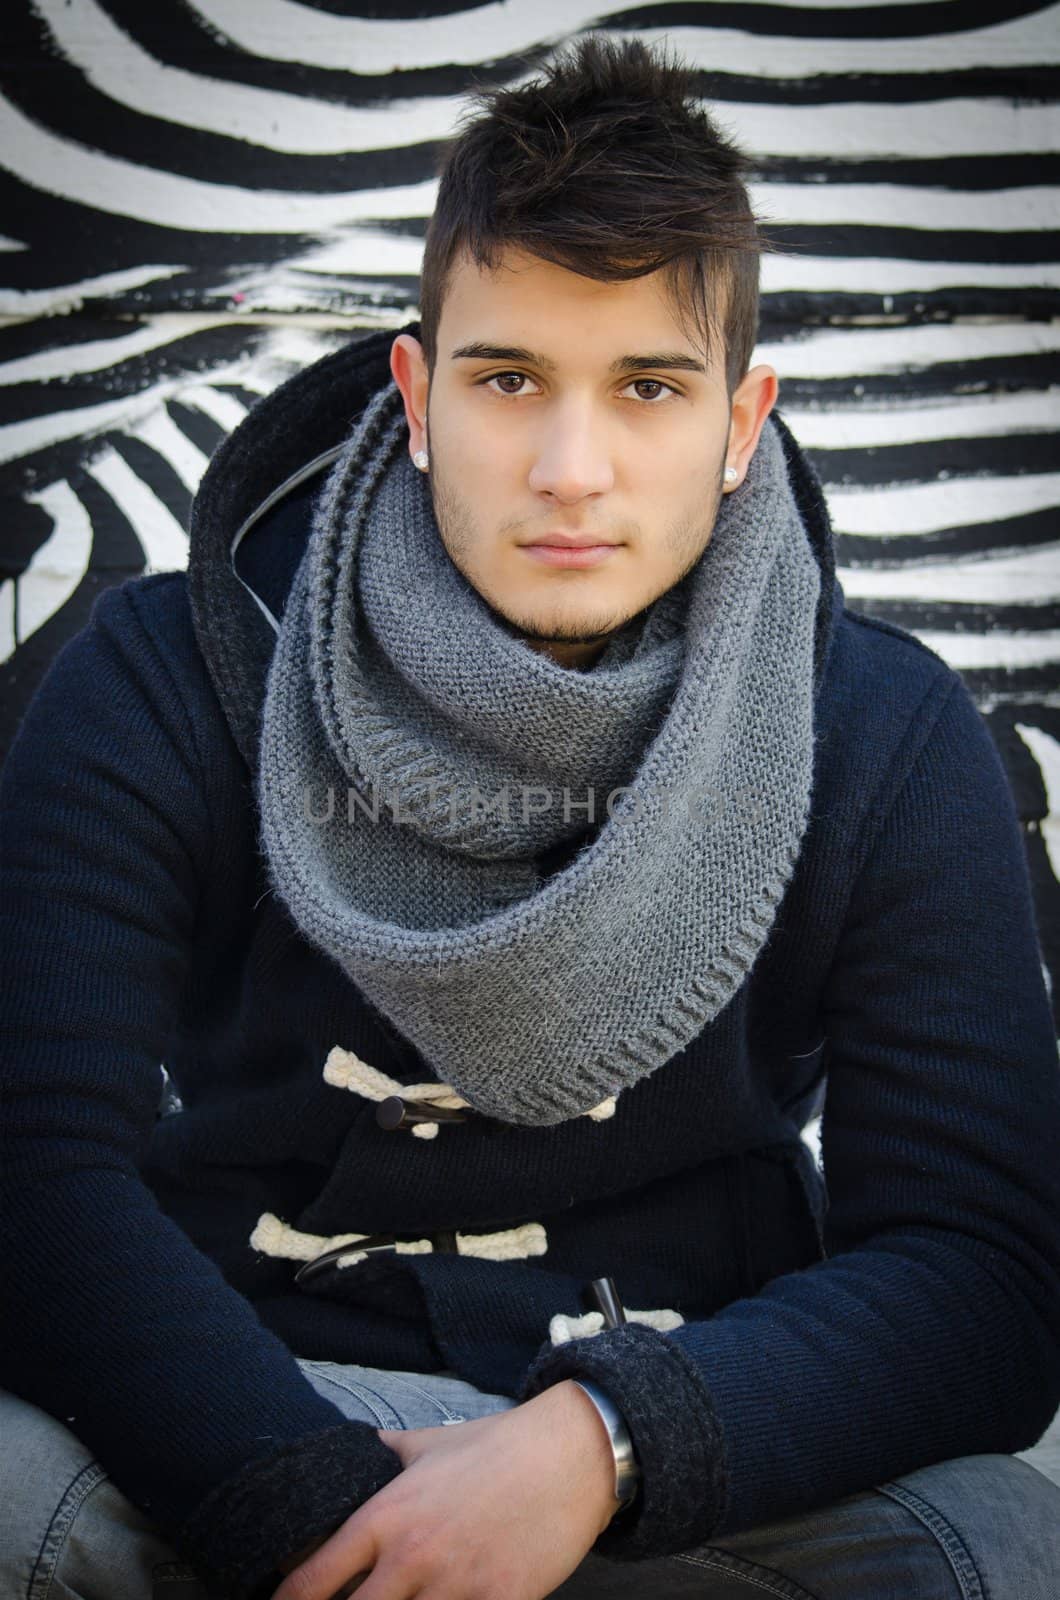 Attractive young man sitting against zebra striped design